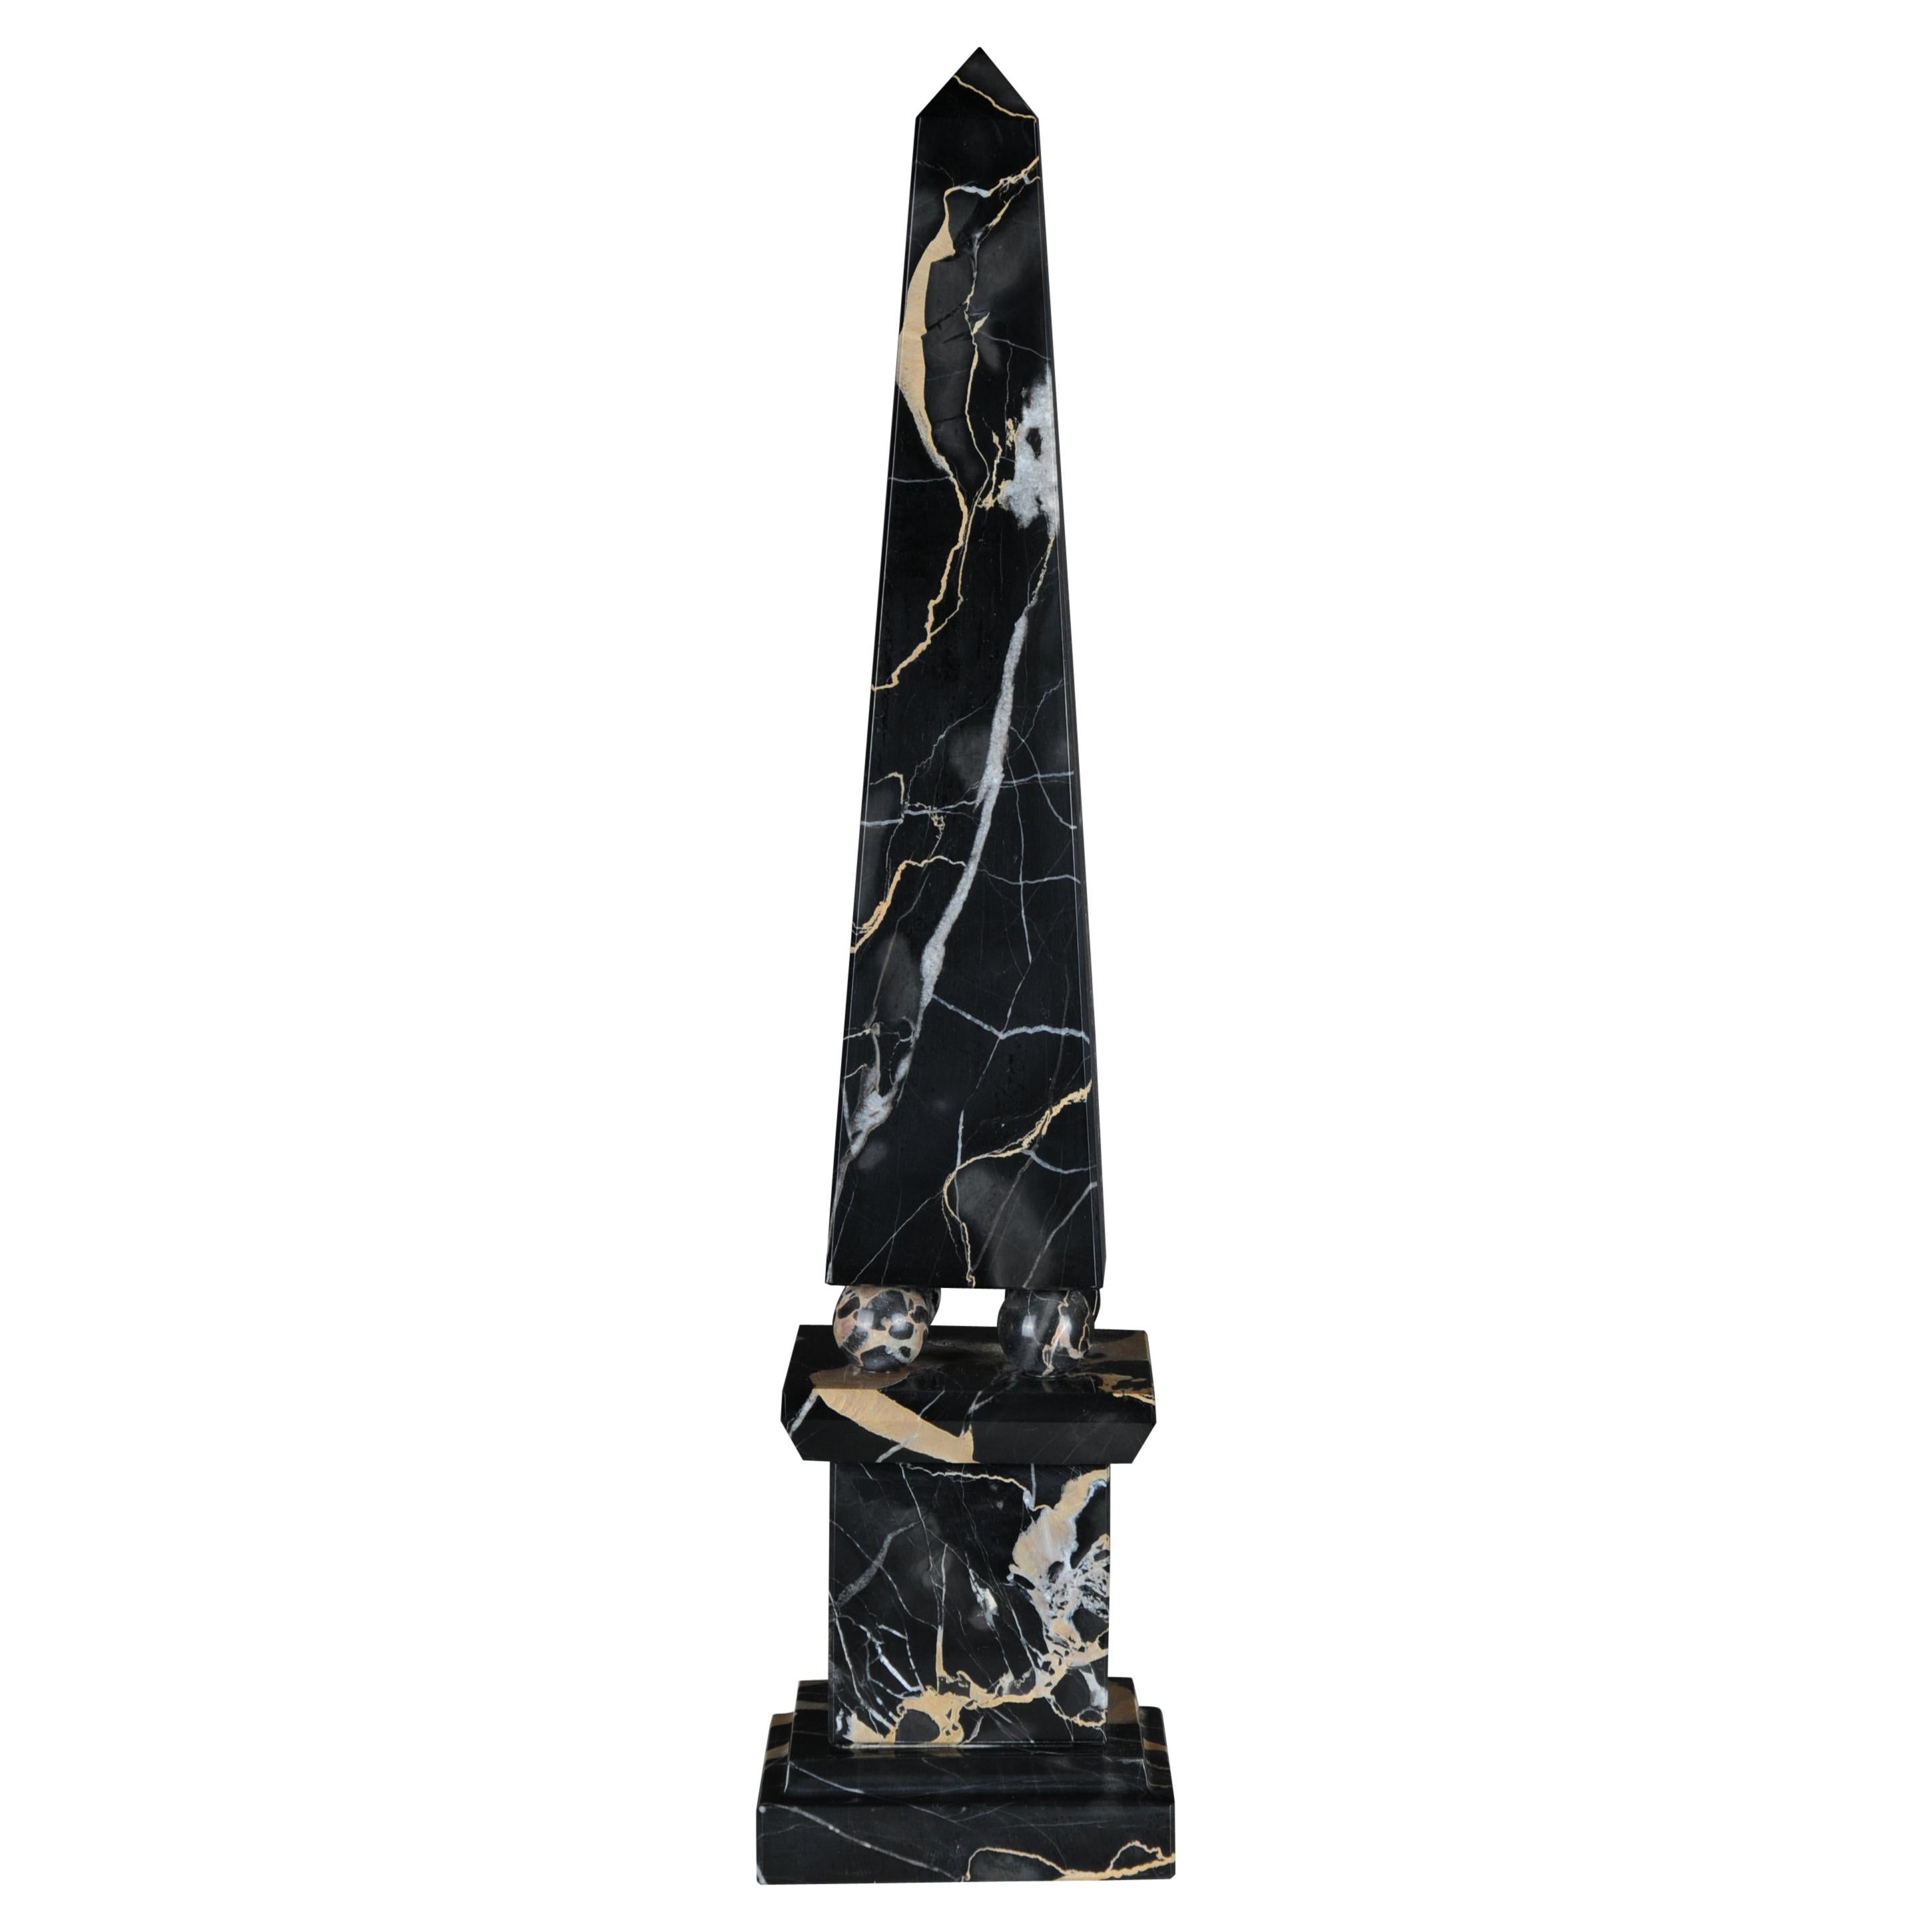 20th Century Imposing Black Marble Obelisk, Neoclassicism Style